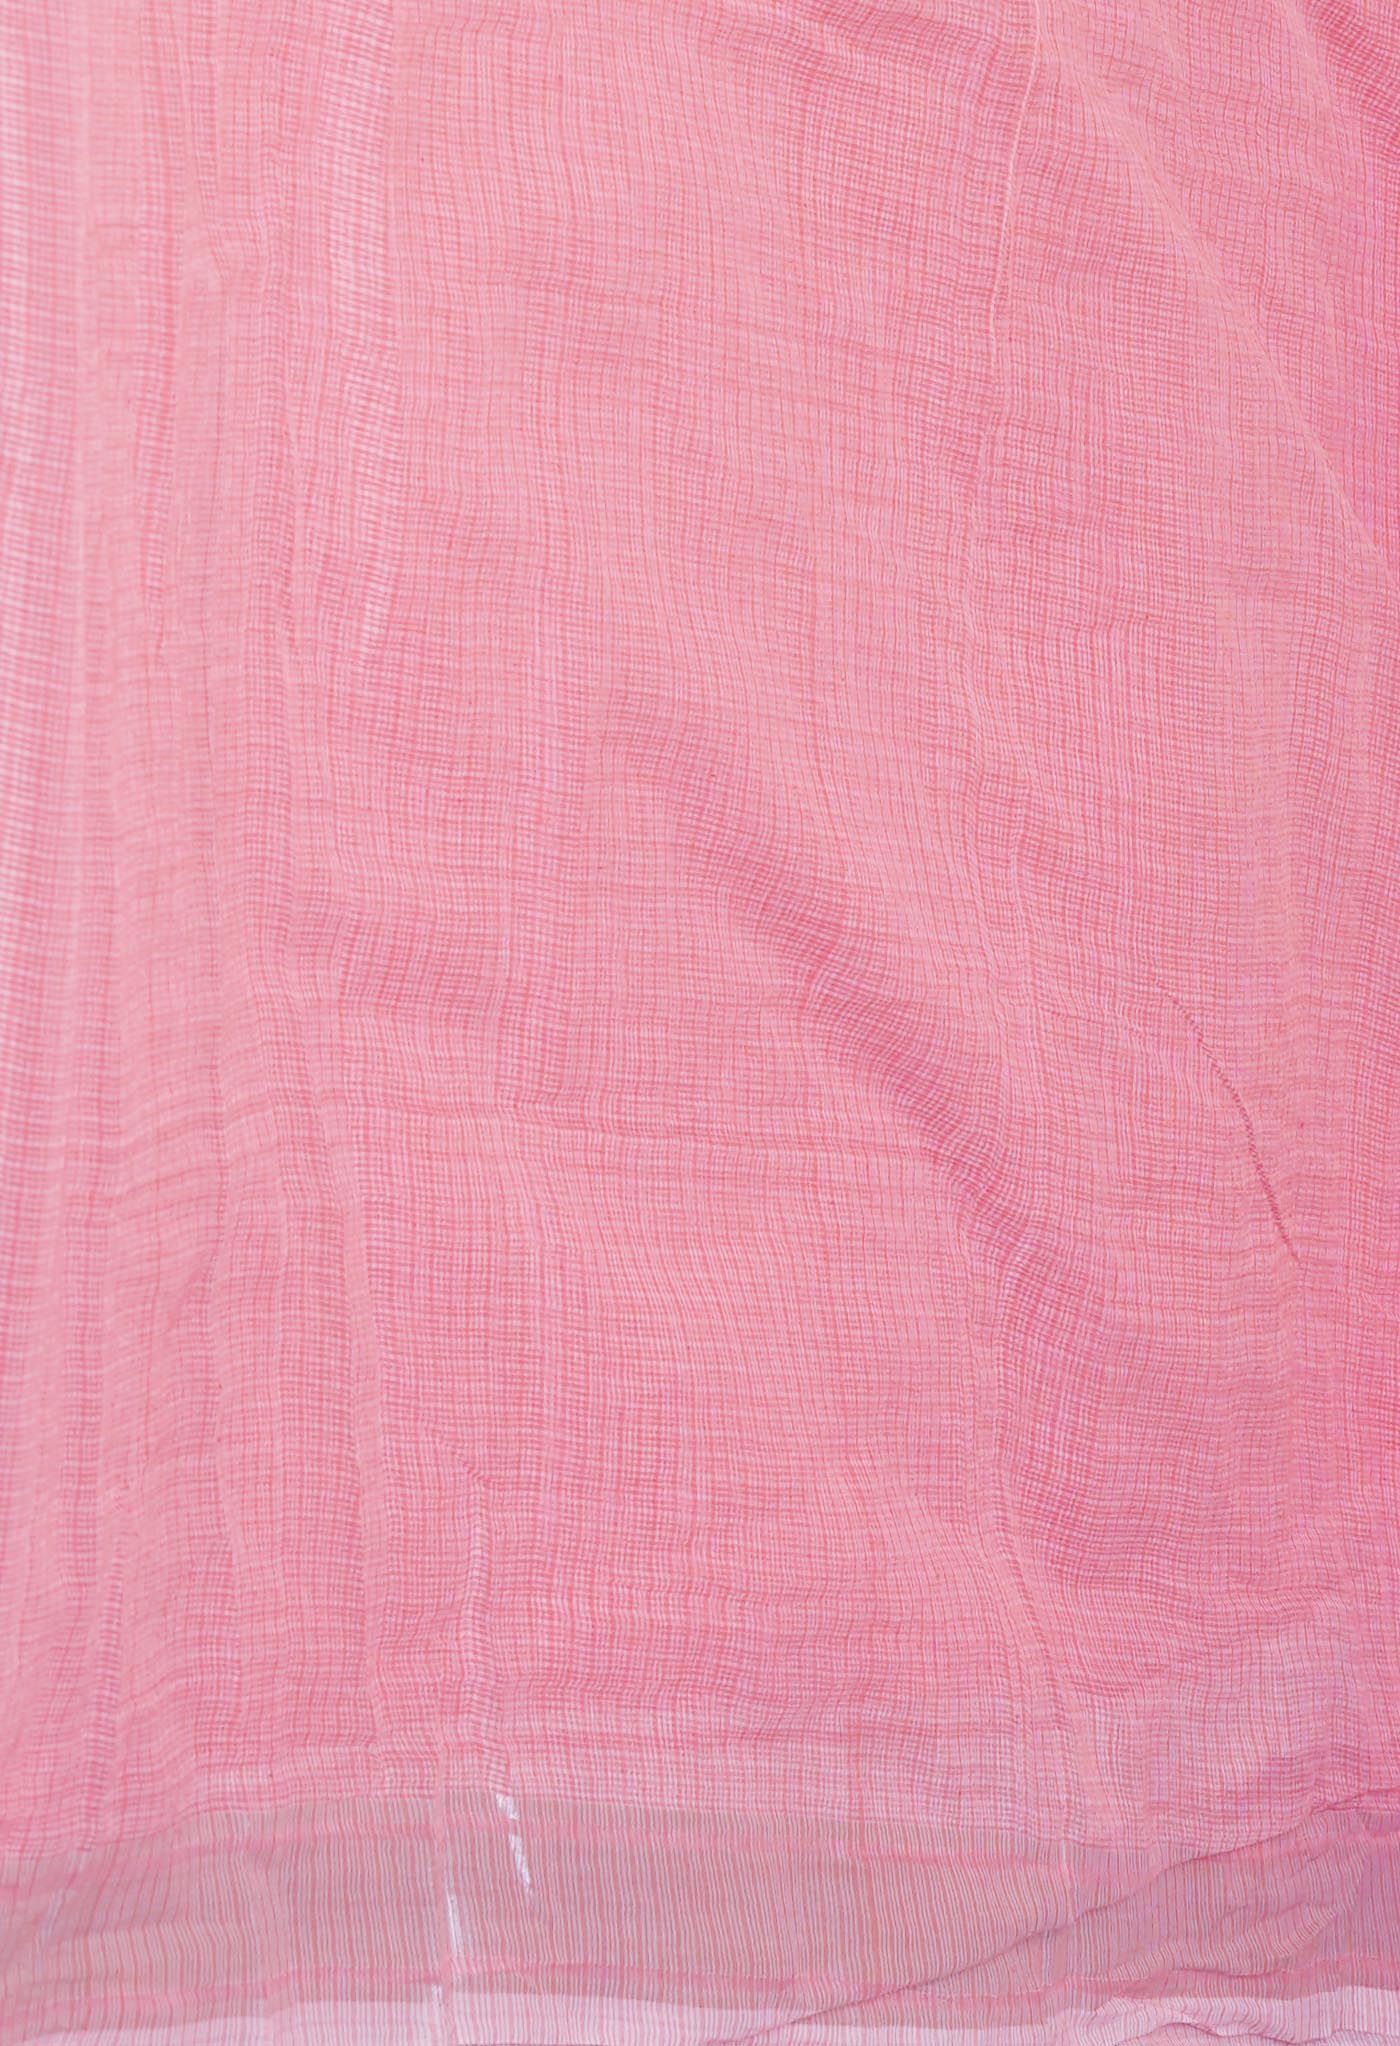 Peach Pink Pure  Kota With Sequence Embroidery cotton Saree-UNM70559